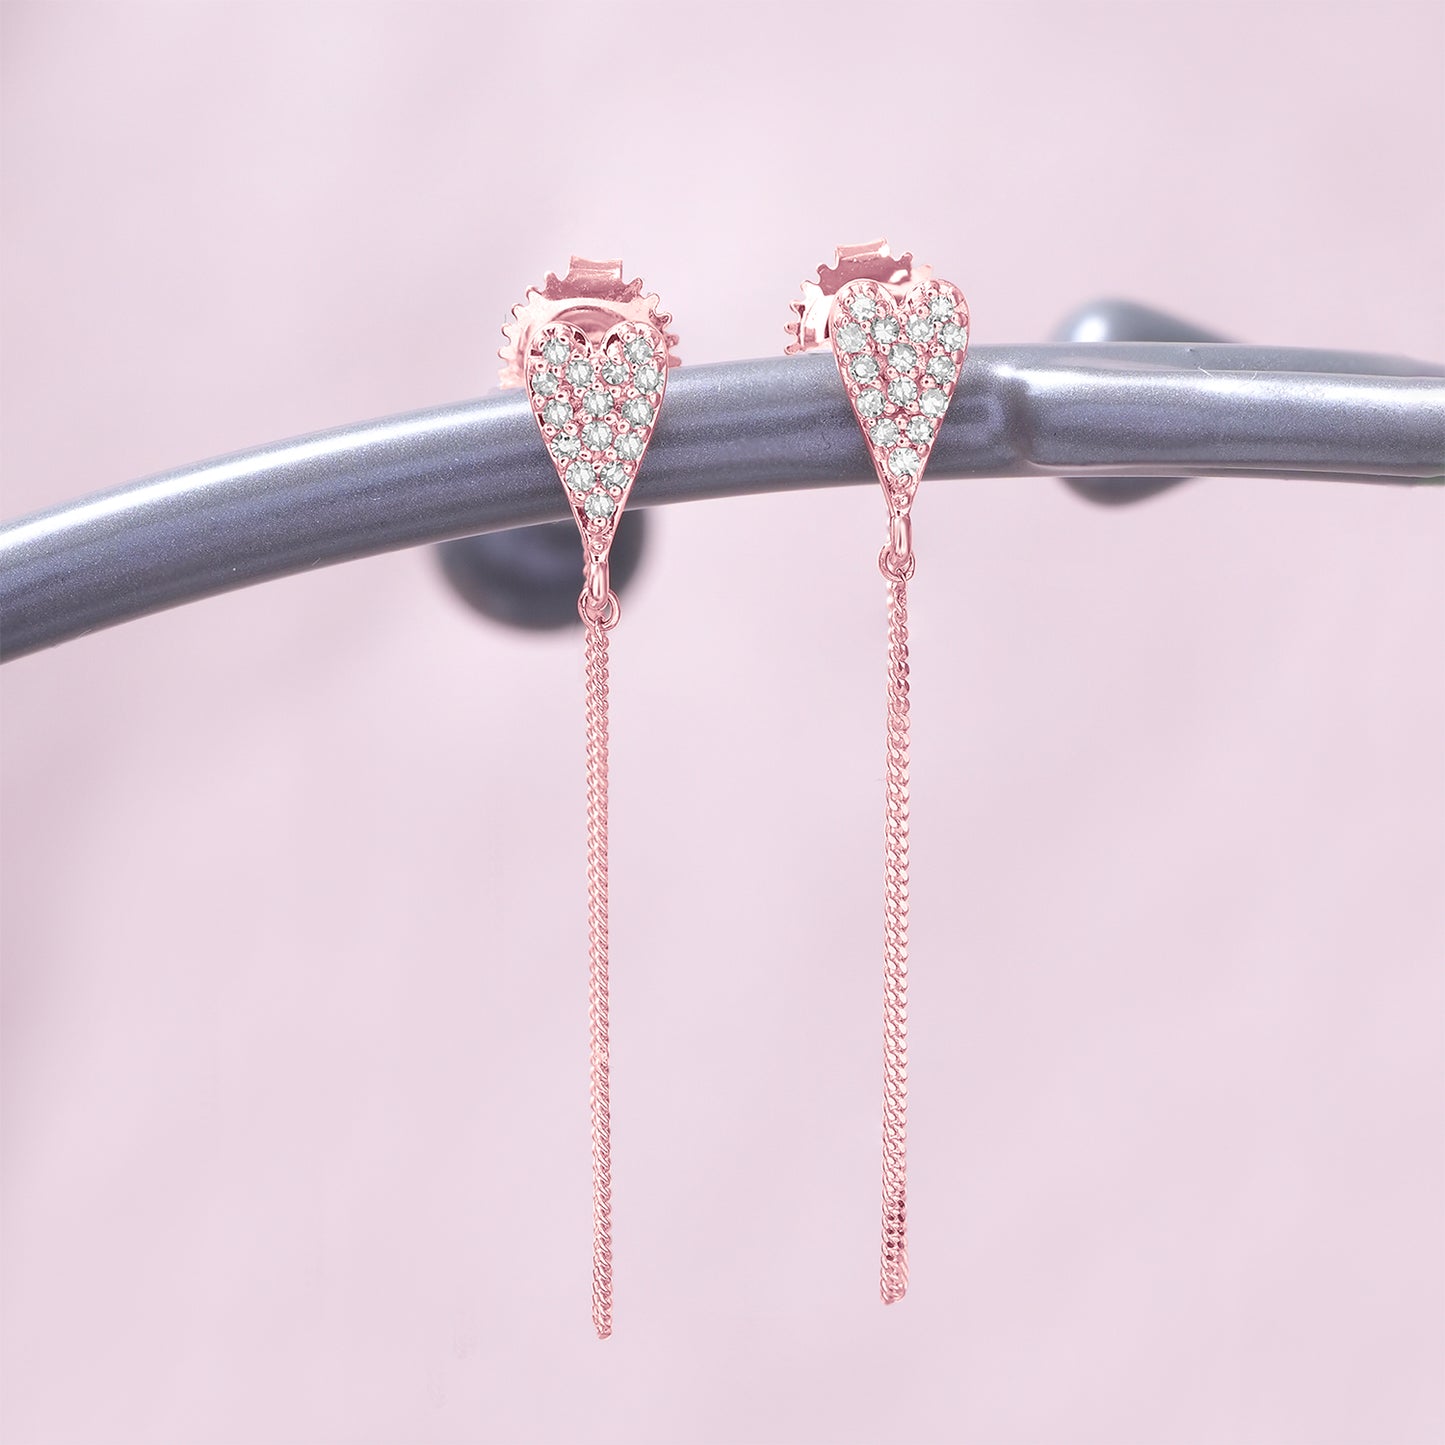 Chain heart earrings in Rose Gold with diamonds